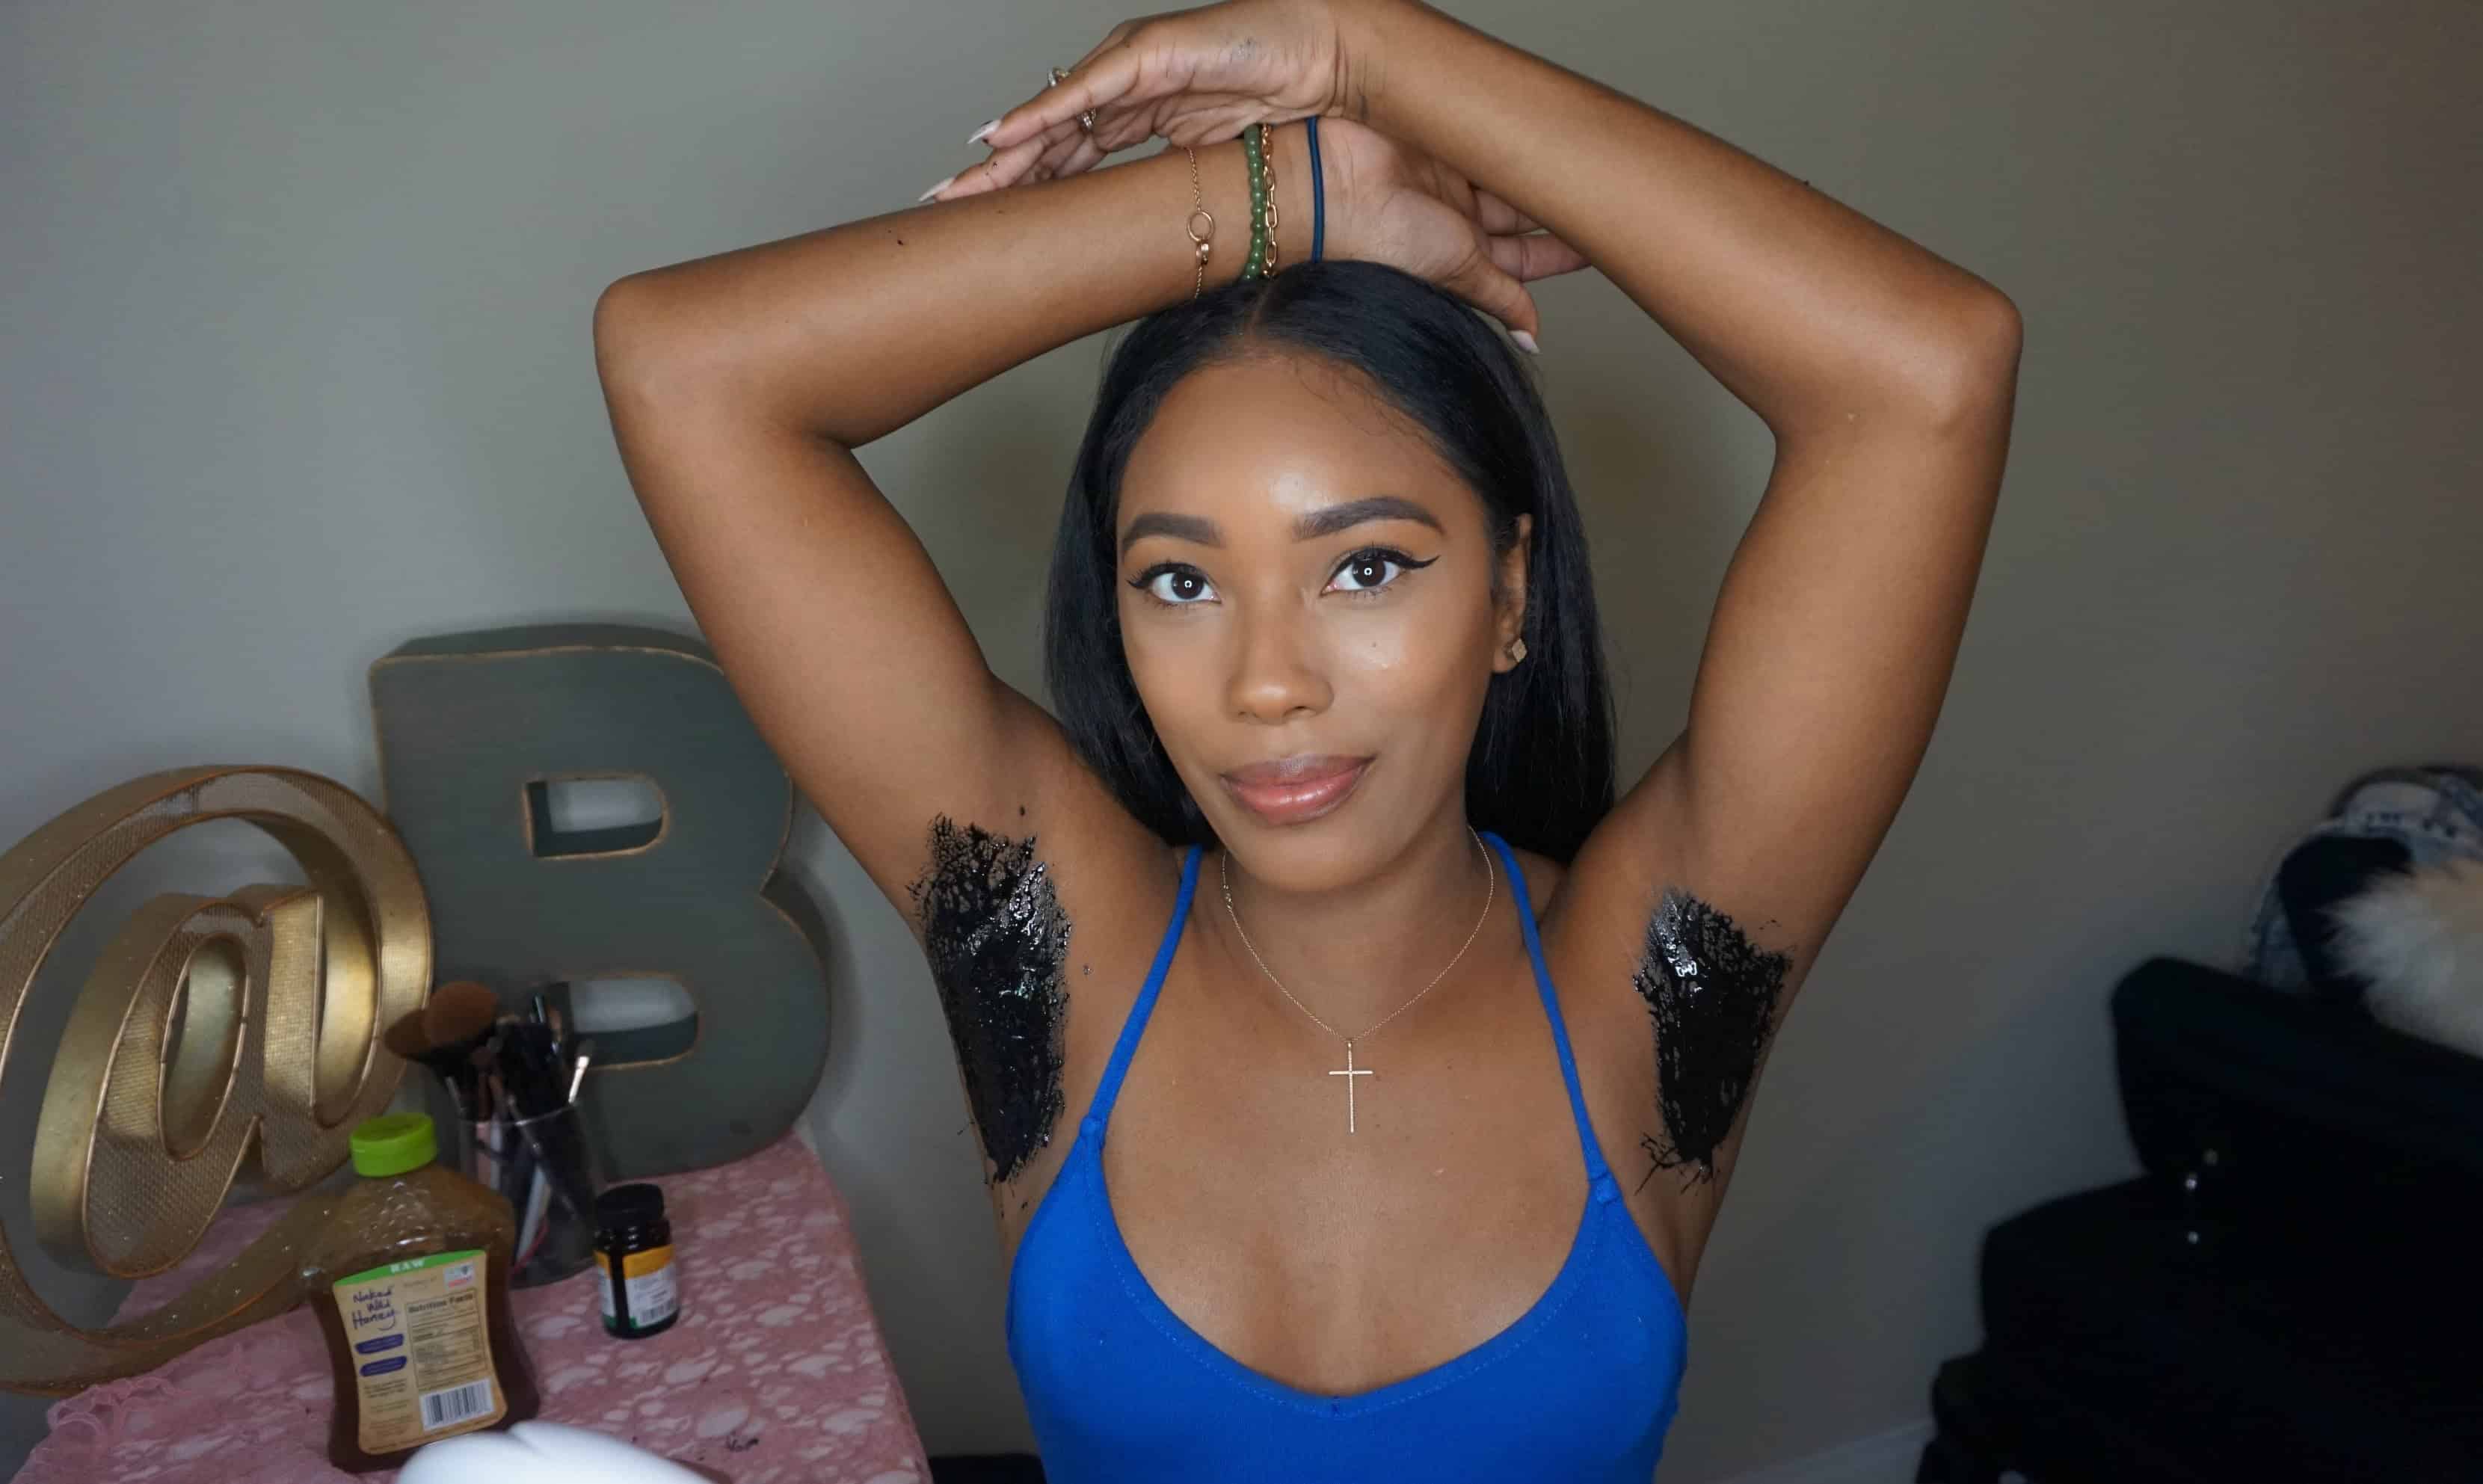 diy underarms charcoal lovely bryana